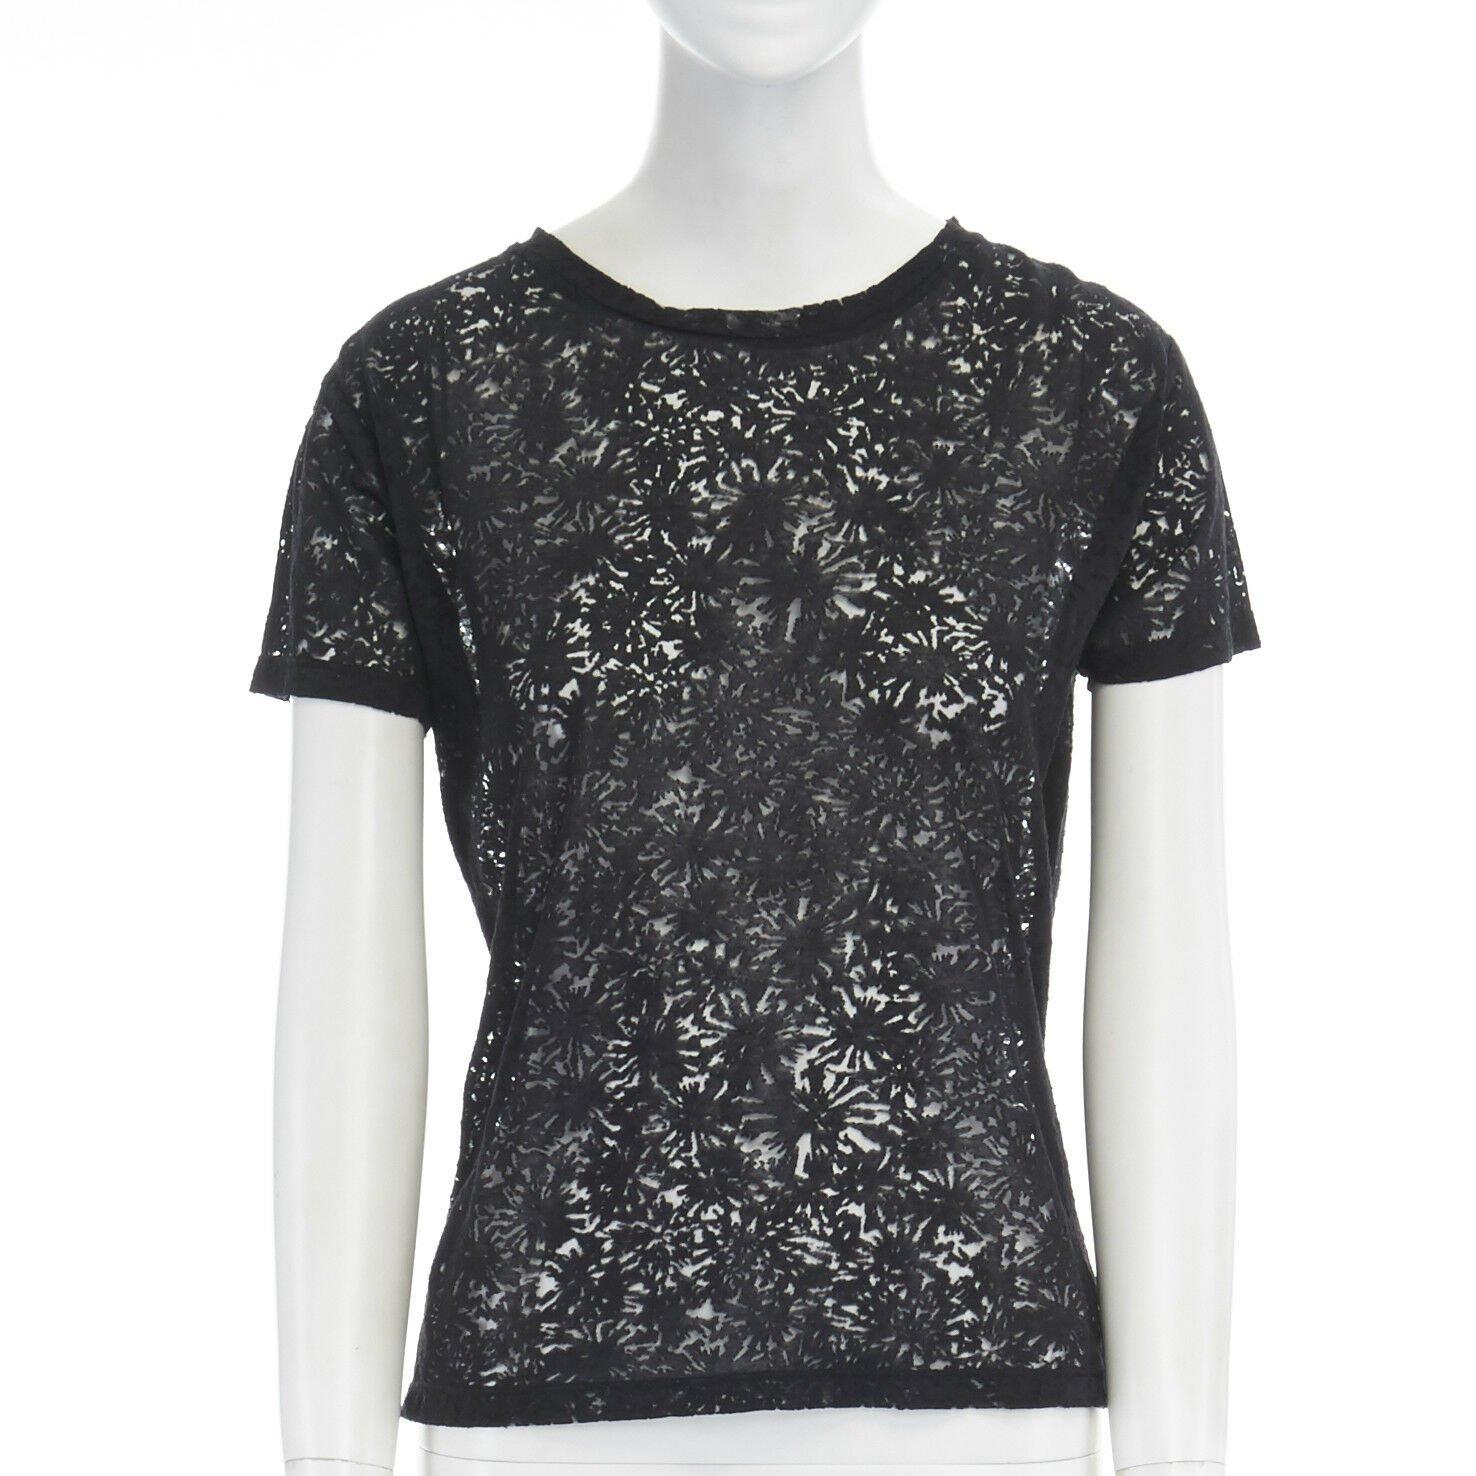 THE KOOPLES black abstract semi sheer burnout short sleeve t-shirt top XS
Brand: The Kooples
Model Name / Style: T-shirt
Material: Lyocell, cotton, polyester
Color: Black
Pattern: Abstract
Closure: Pull on
Extra Detail: Short sleeve. Round Neck